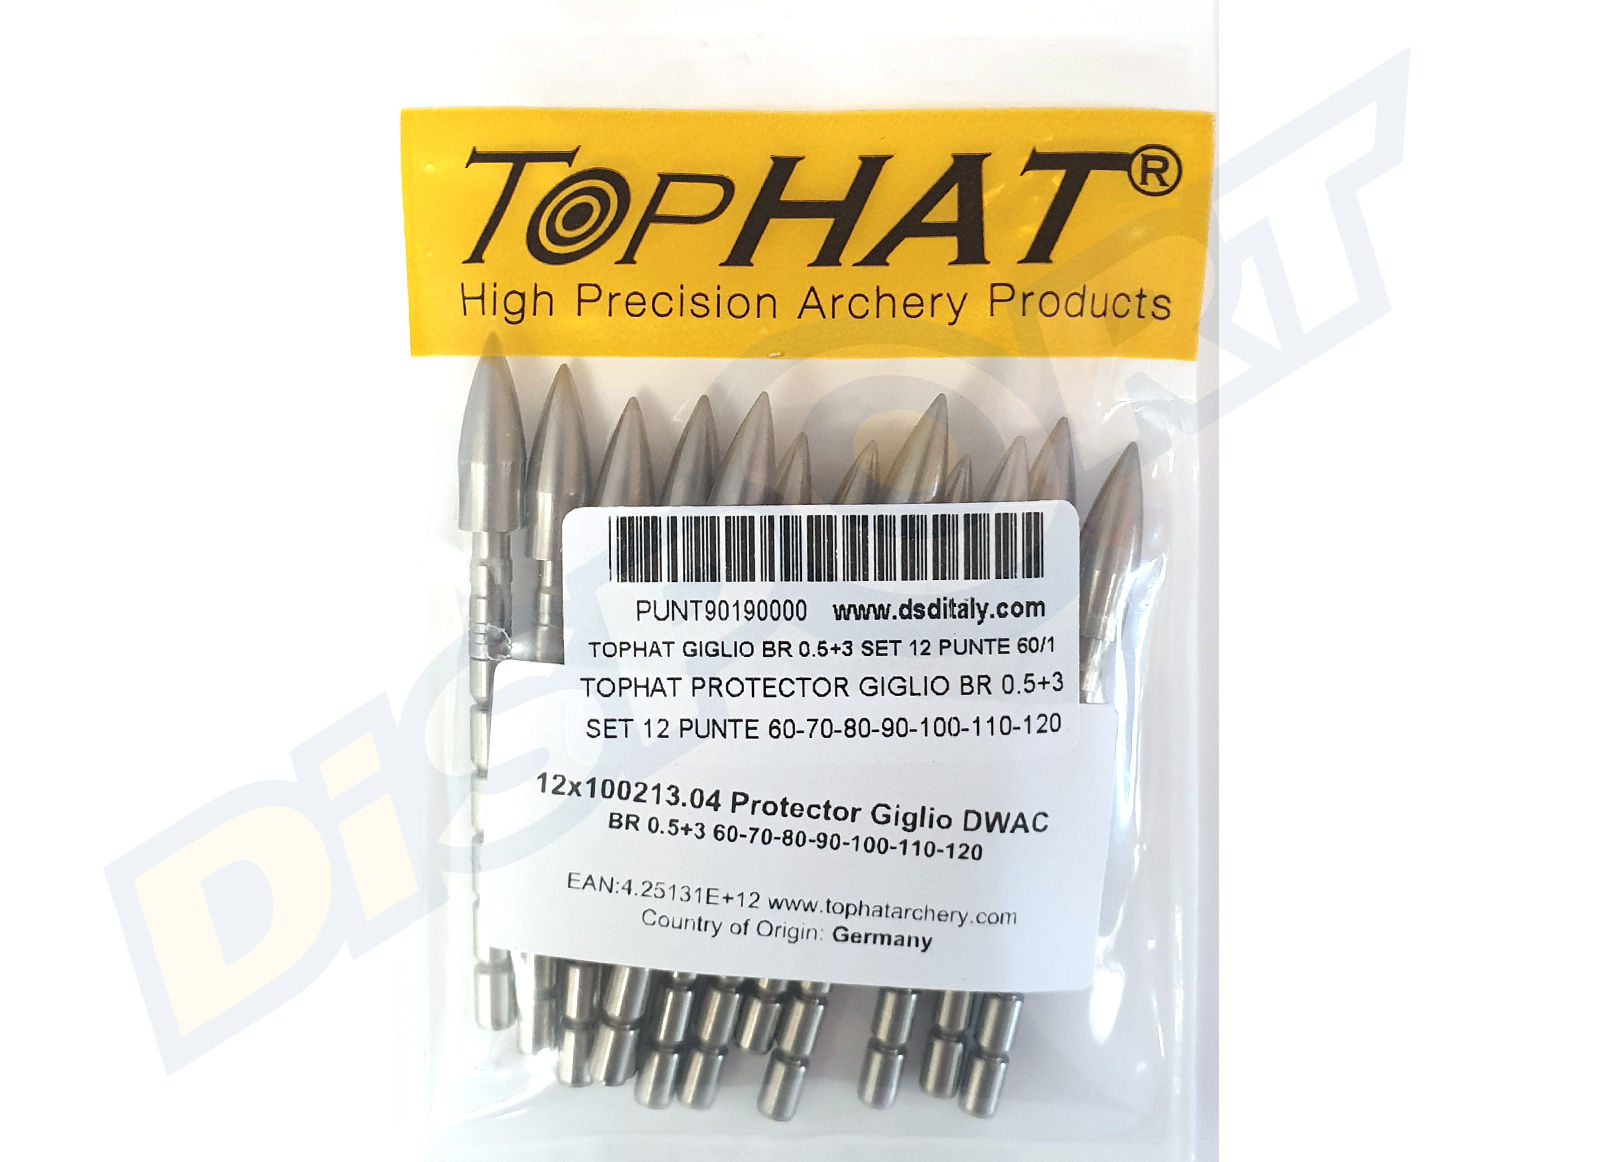 TOPHAT PROTECTOR GIGLIO DWAC BR 0.5+3 SET 12 PUNTE 60-70-80-90-100-110-120 (100213.04)